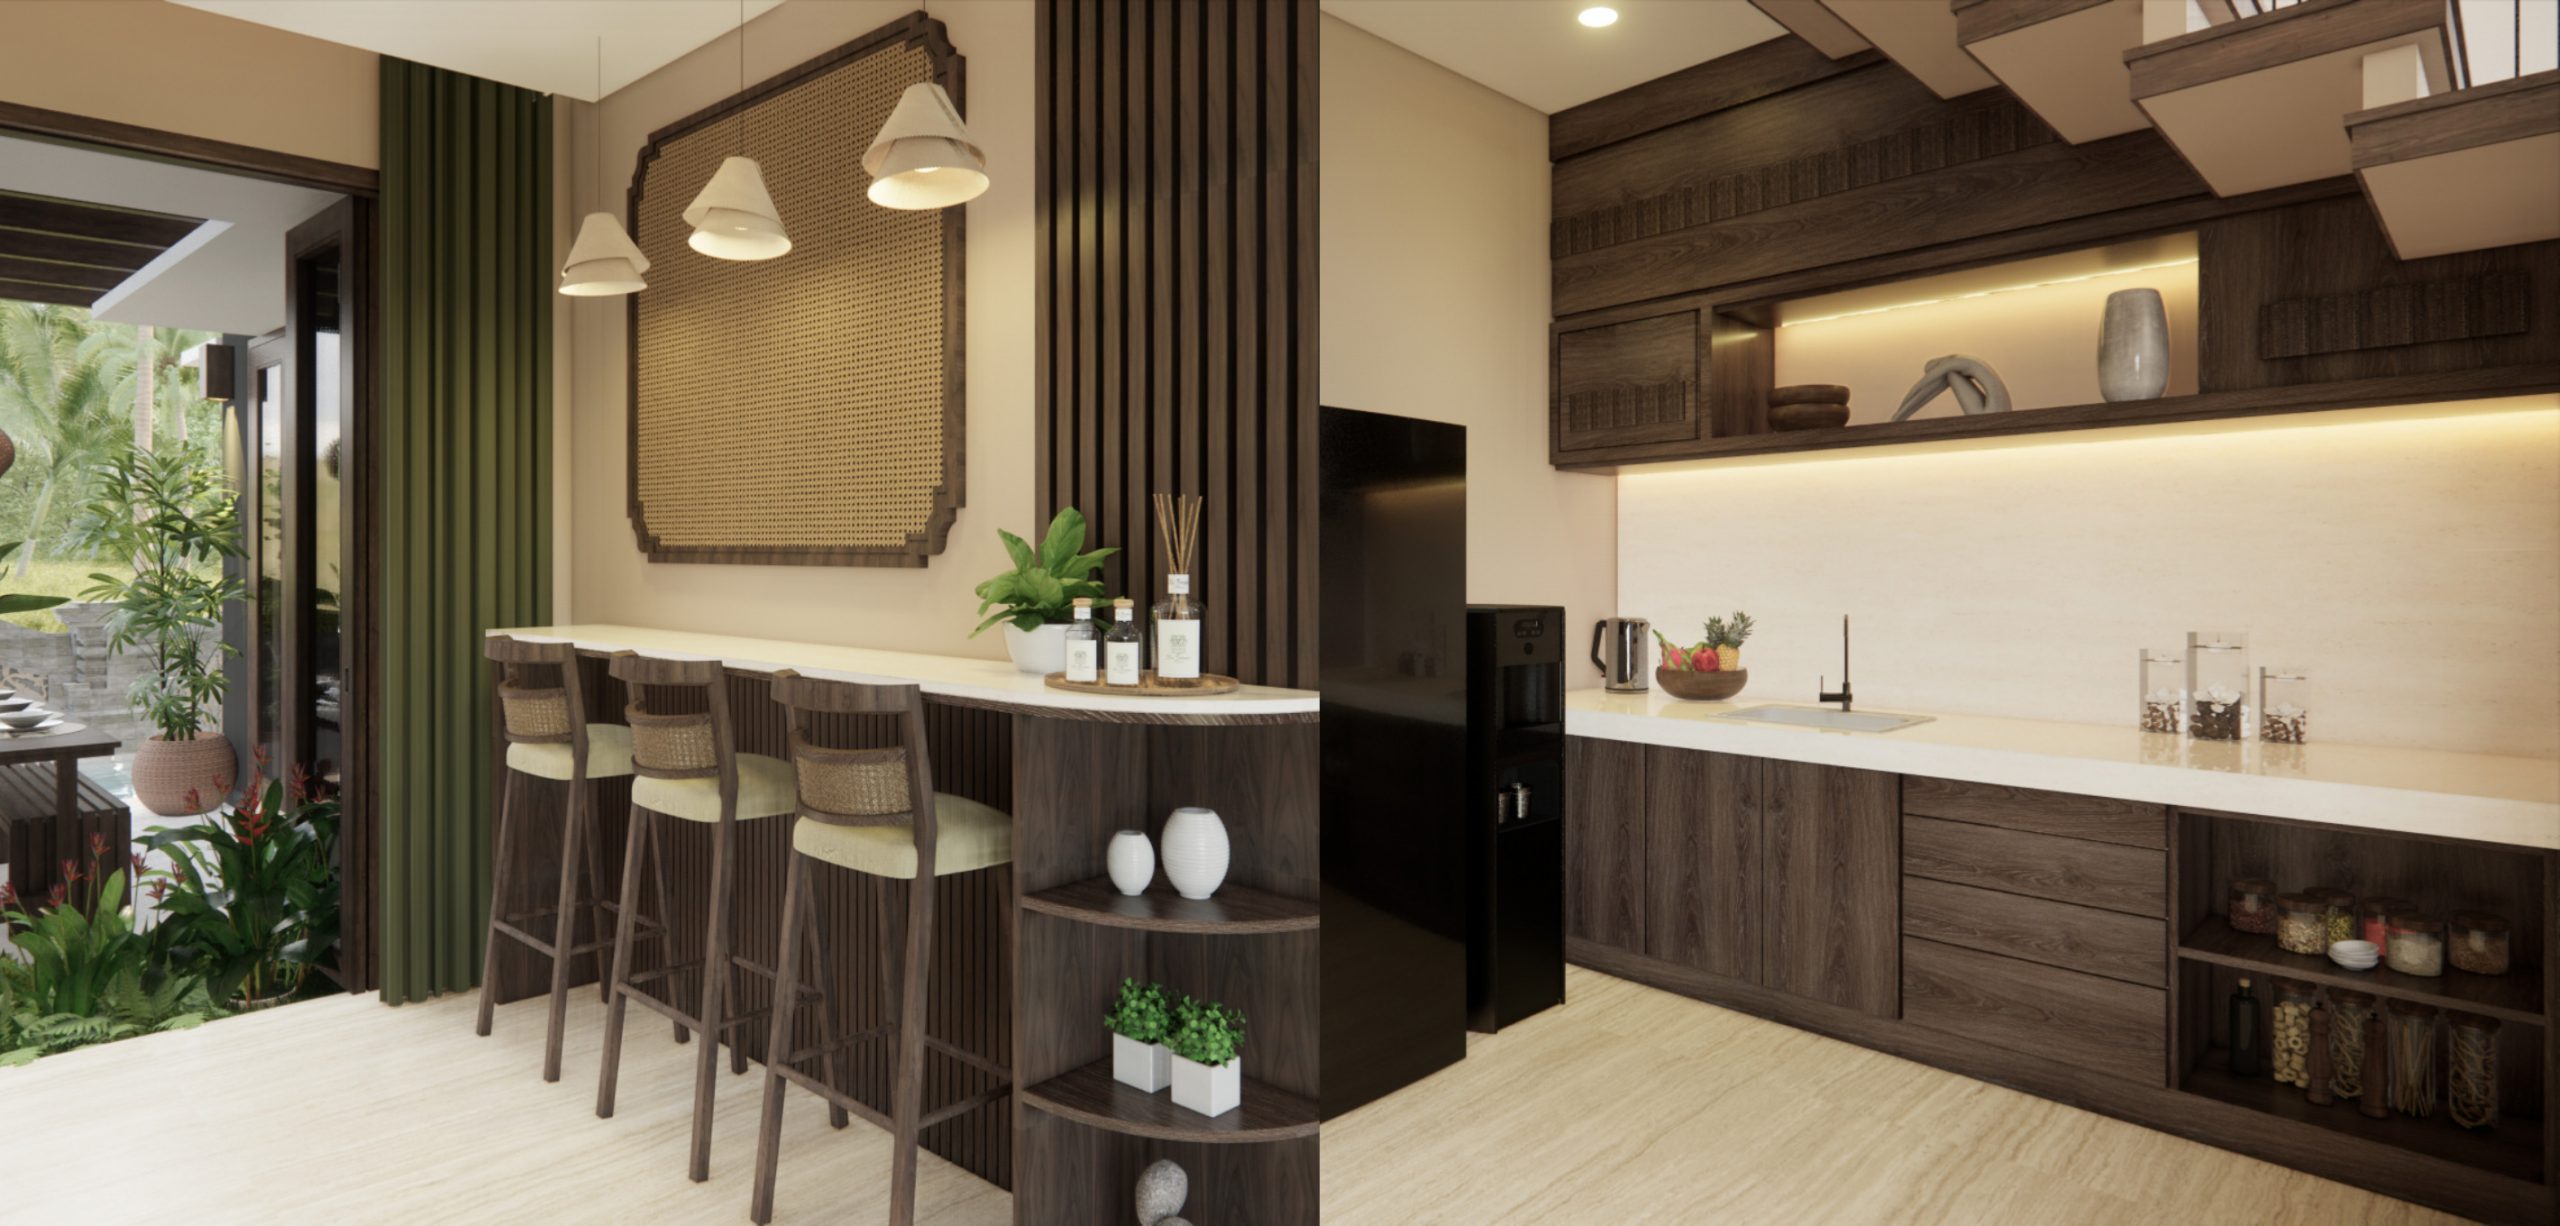 Bar Kitchenette for casual dining equipped with modern appliances